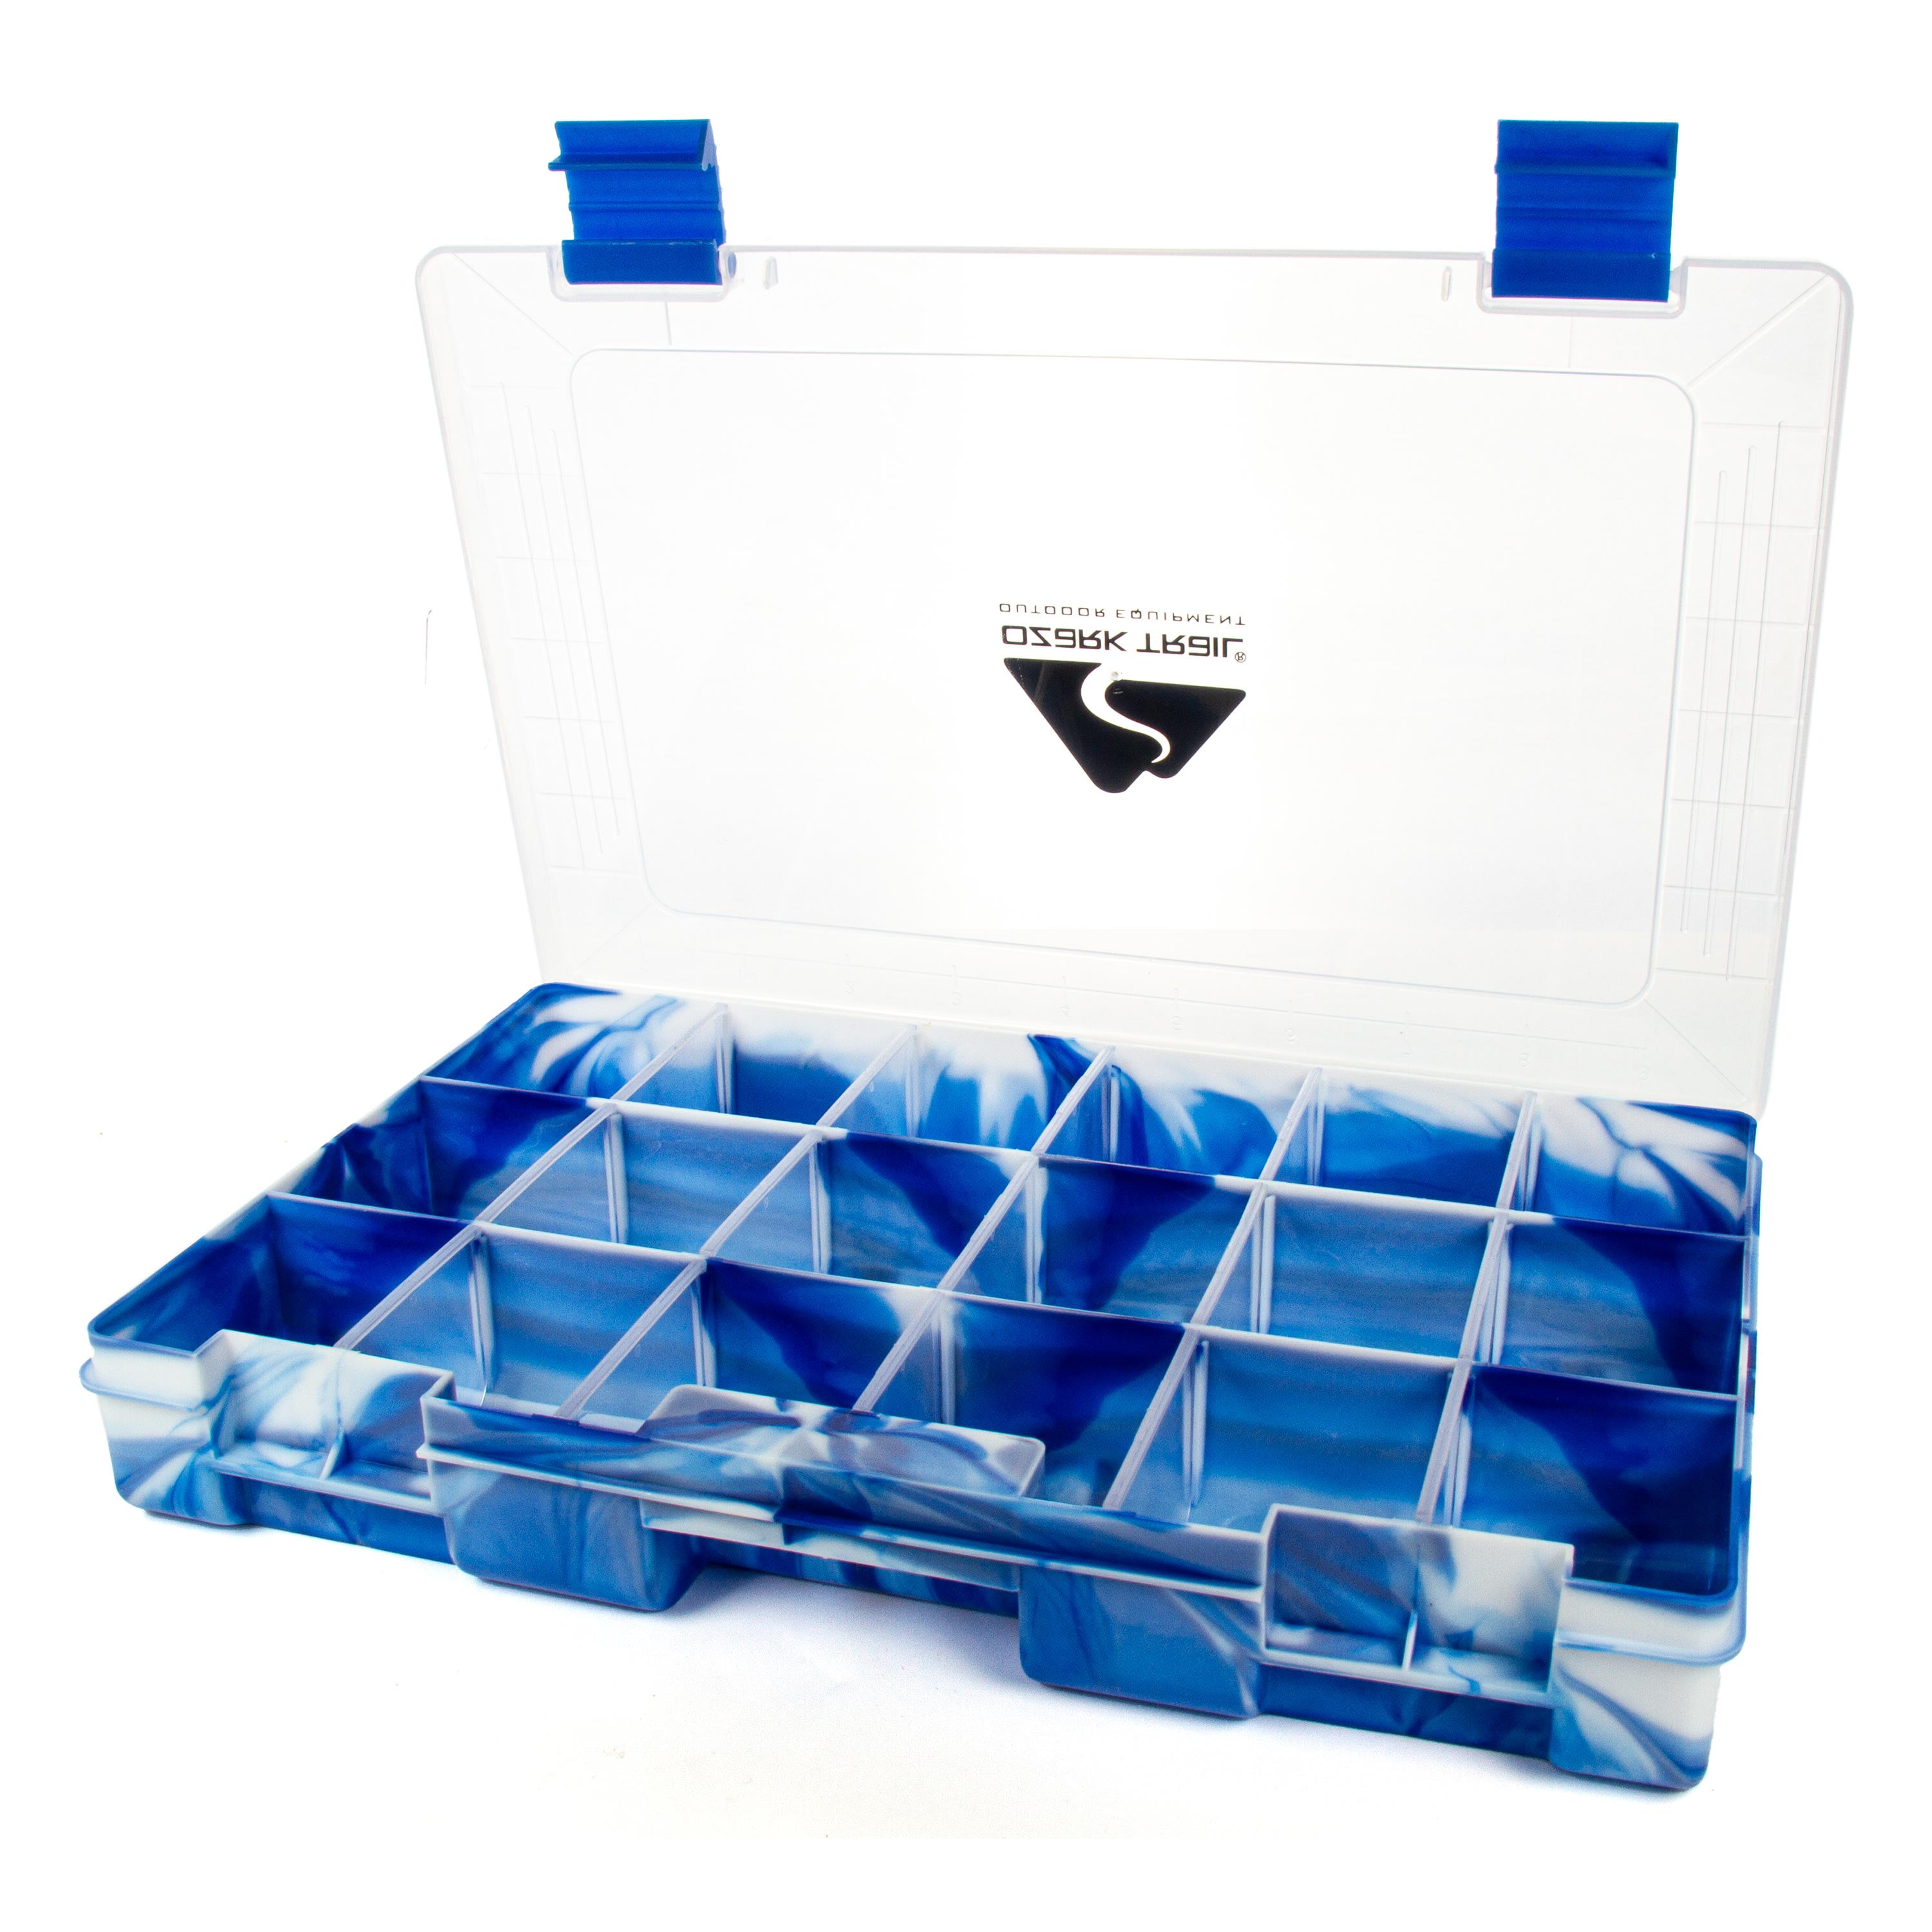 1323 Tackle Box Insert - Clear 4.54.5 out of 5  stars550%50%450%50%30%0%20%0%10%0%View 2 reviews2 reviews | Ask question